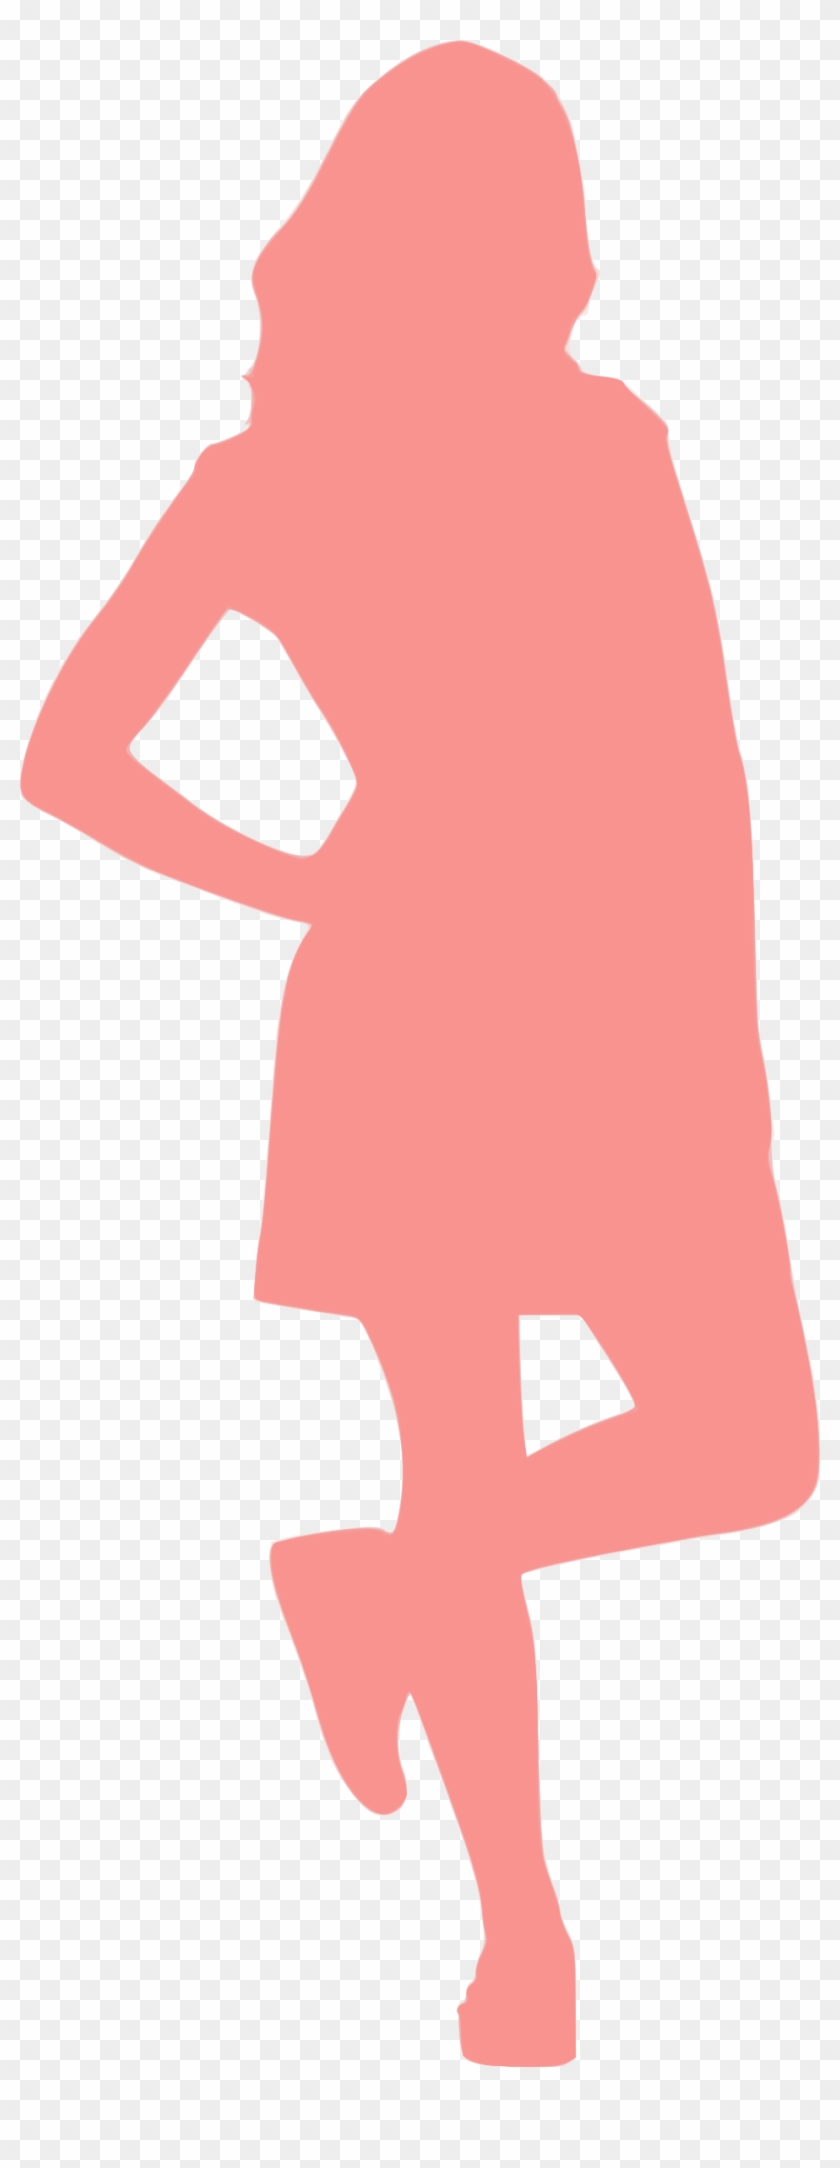 This Free Icons Png Design Of Silhouette Femme 80 Clipart #5212972